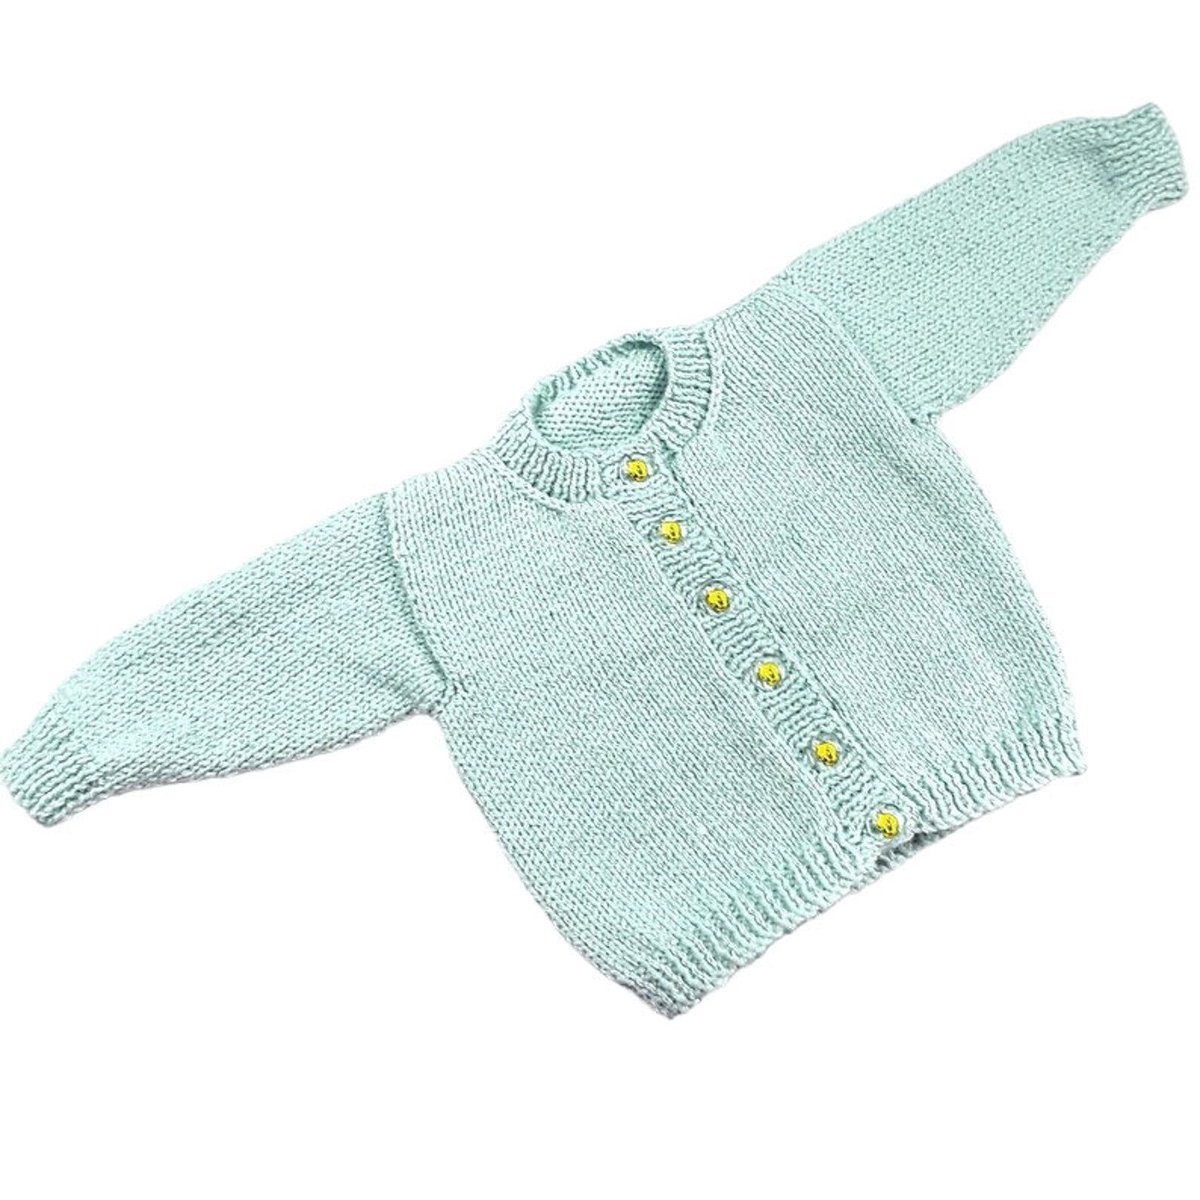 Discover this charming hand knitted cardigan for baby boys and girls! Designed in soothing duck egg blue and ideal for 0-3 months. Available now on #Etsy knittingtopia.etsy.com/listing/661939… #knittingtopia #BabyFashion #MHHSBD #craftbizparty